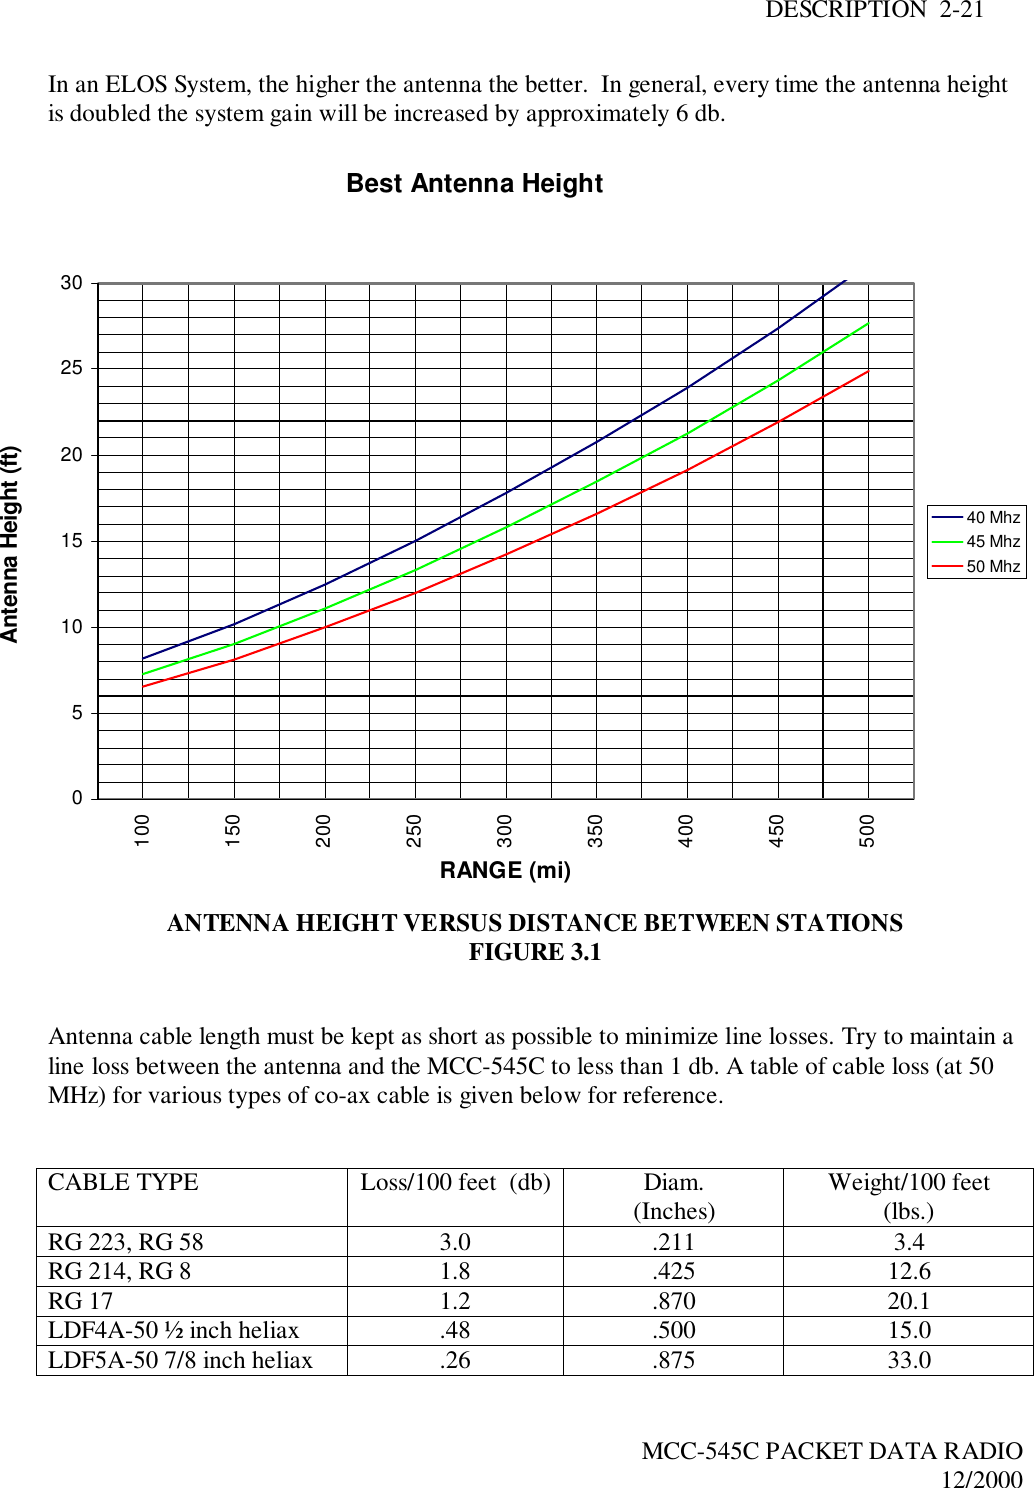 DESCRIPTION  2-21MCC-545C PACKET DATA RADIO12/2000In an ELOS System, the higher the antenna the better.  In general, every time the antenna heightis doubled the system gain will be increased by approximately 6 db.ANTENNA HEIGHT VERSUS DISTANCE BETWEEN STATIONSFIGURE 3.1Antenna cable length must be kept as short as possible to minimize line losses. Try to maintain aline loss between the antenna and the MCC-545C to less than 1 db. A table of cable loss (at 50MHz) for various types of co-ax cable is given below for reference.CABLE TYPE Loss/100 feet  (db) Diam.(Inches) Weight/100 feet(lbs.)RG 223, RG 58 3.0 .211 3.4RG 214, RG 8 1.8 .425 12.6RG 17 1.2 .870 20.1LDF4A-50 ½ inch heliax .48 .500 15.0LDF5A-50 7/8 inch heliax .26 .875 33.0Best Antenna Height051015202530100150200250300350400450500RANGE (mi)Antenna Height (ft)40 Mhz45 Mhz50 Mhz